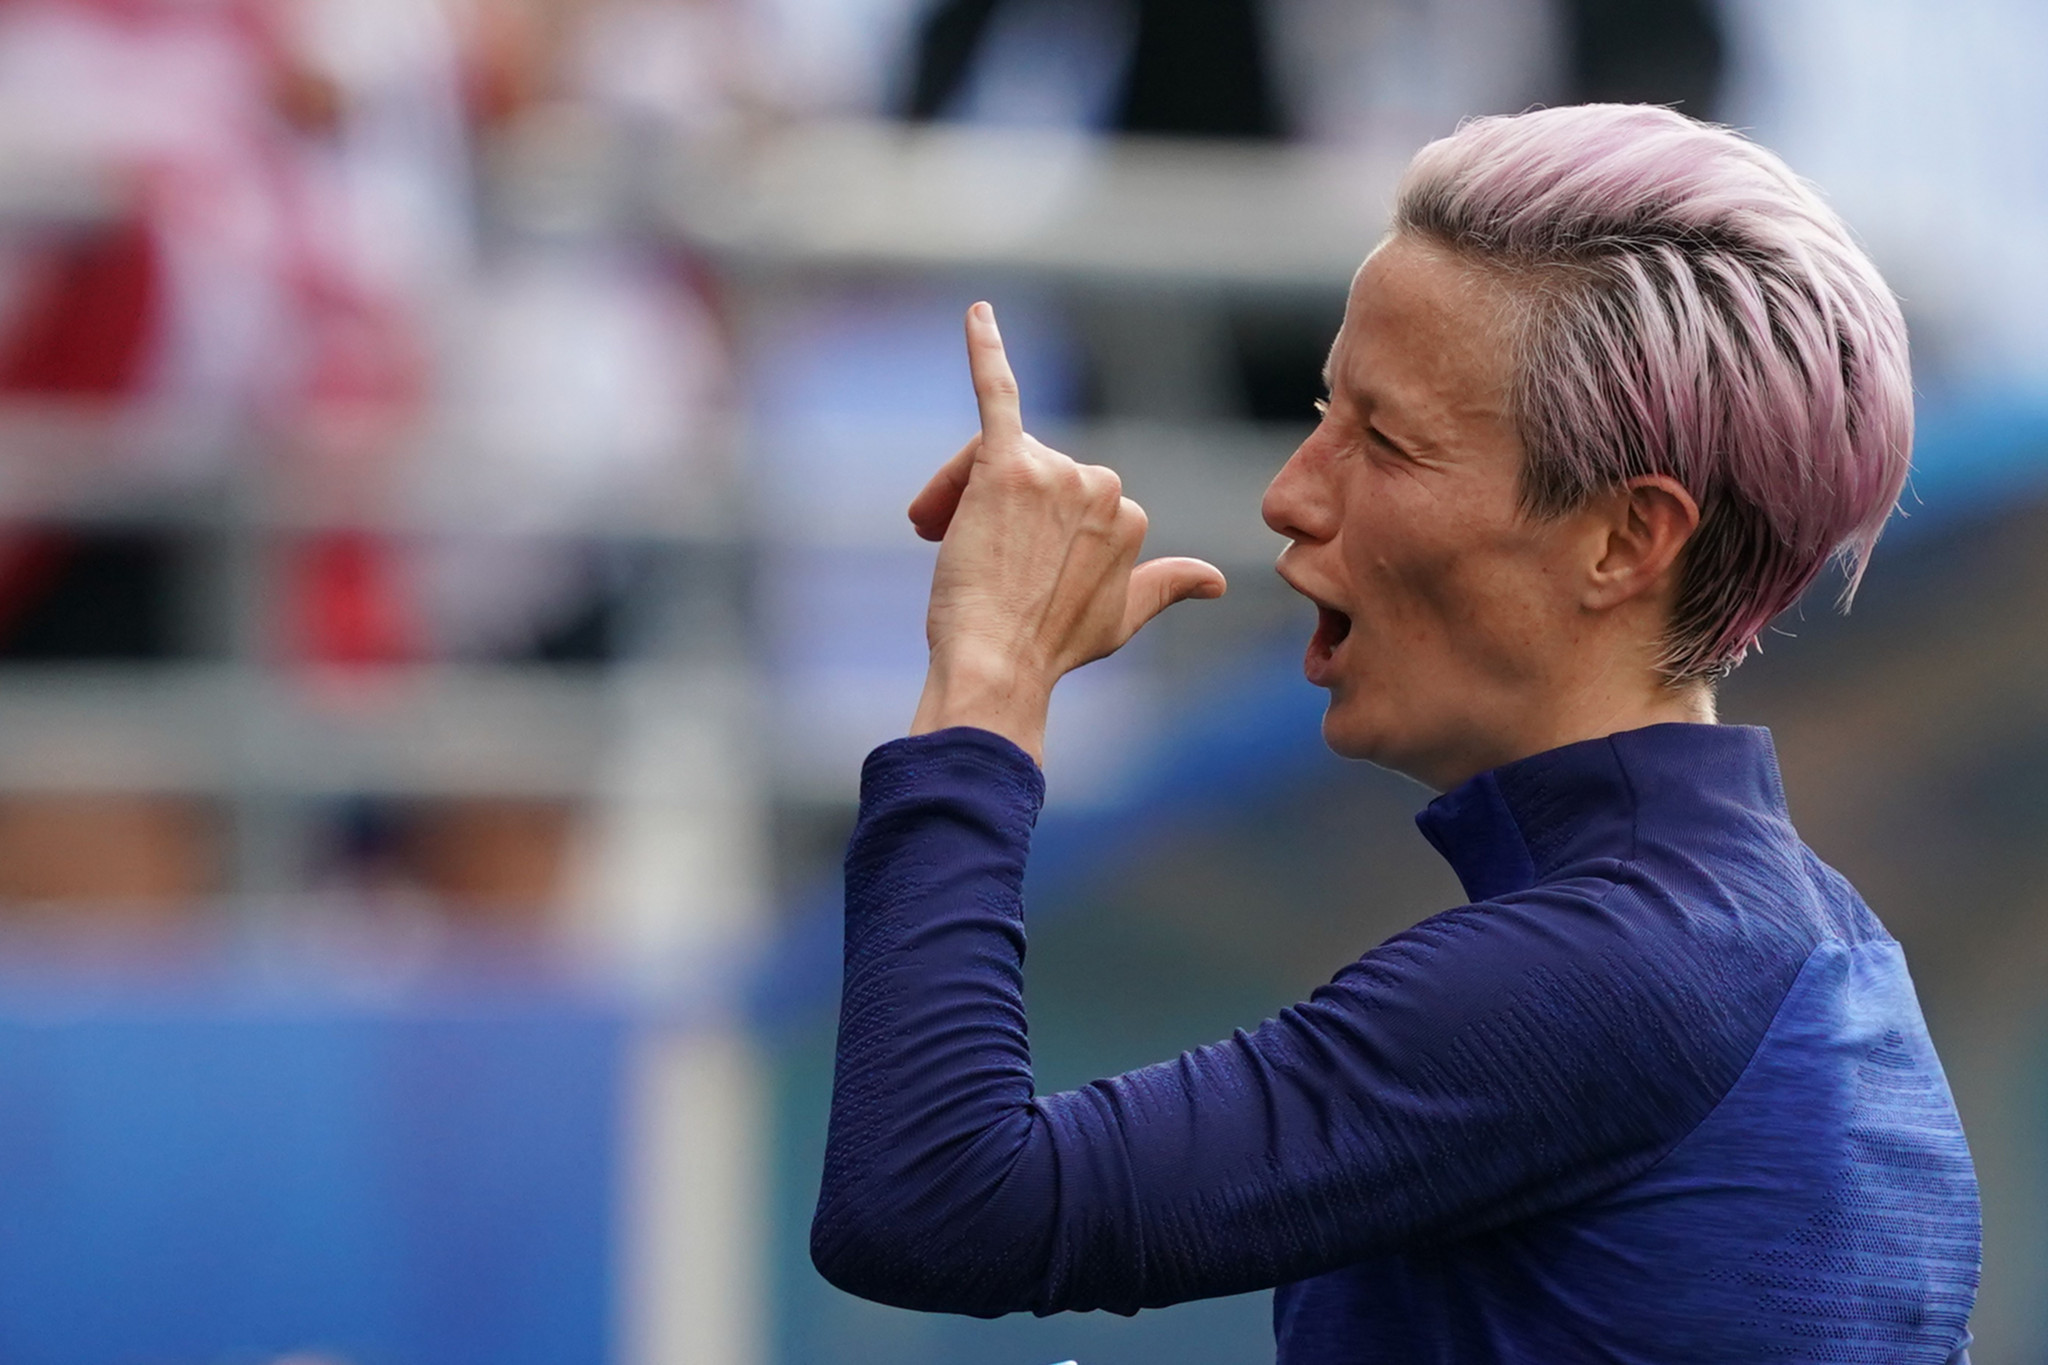 Megan Rapinoe scored two penalties as the United States came through a testing last-16 tie against Spain to set up a mouthwatering FIFA Women's World Cup quarter-final against France ©Getty Images